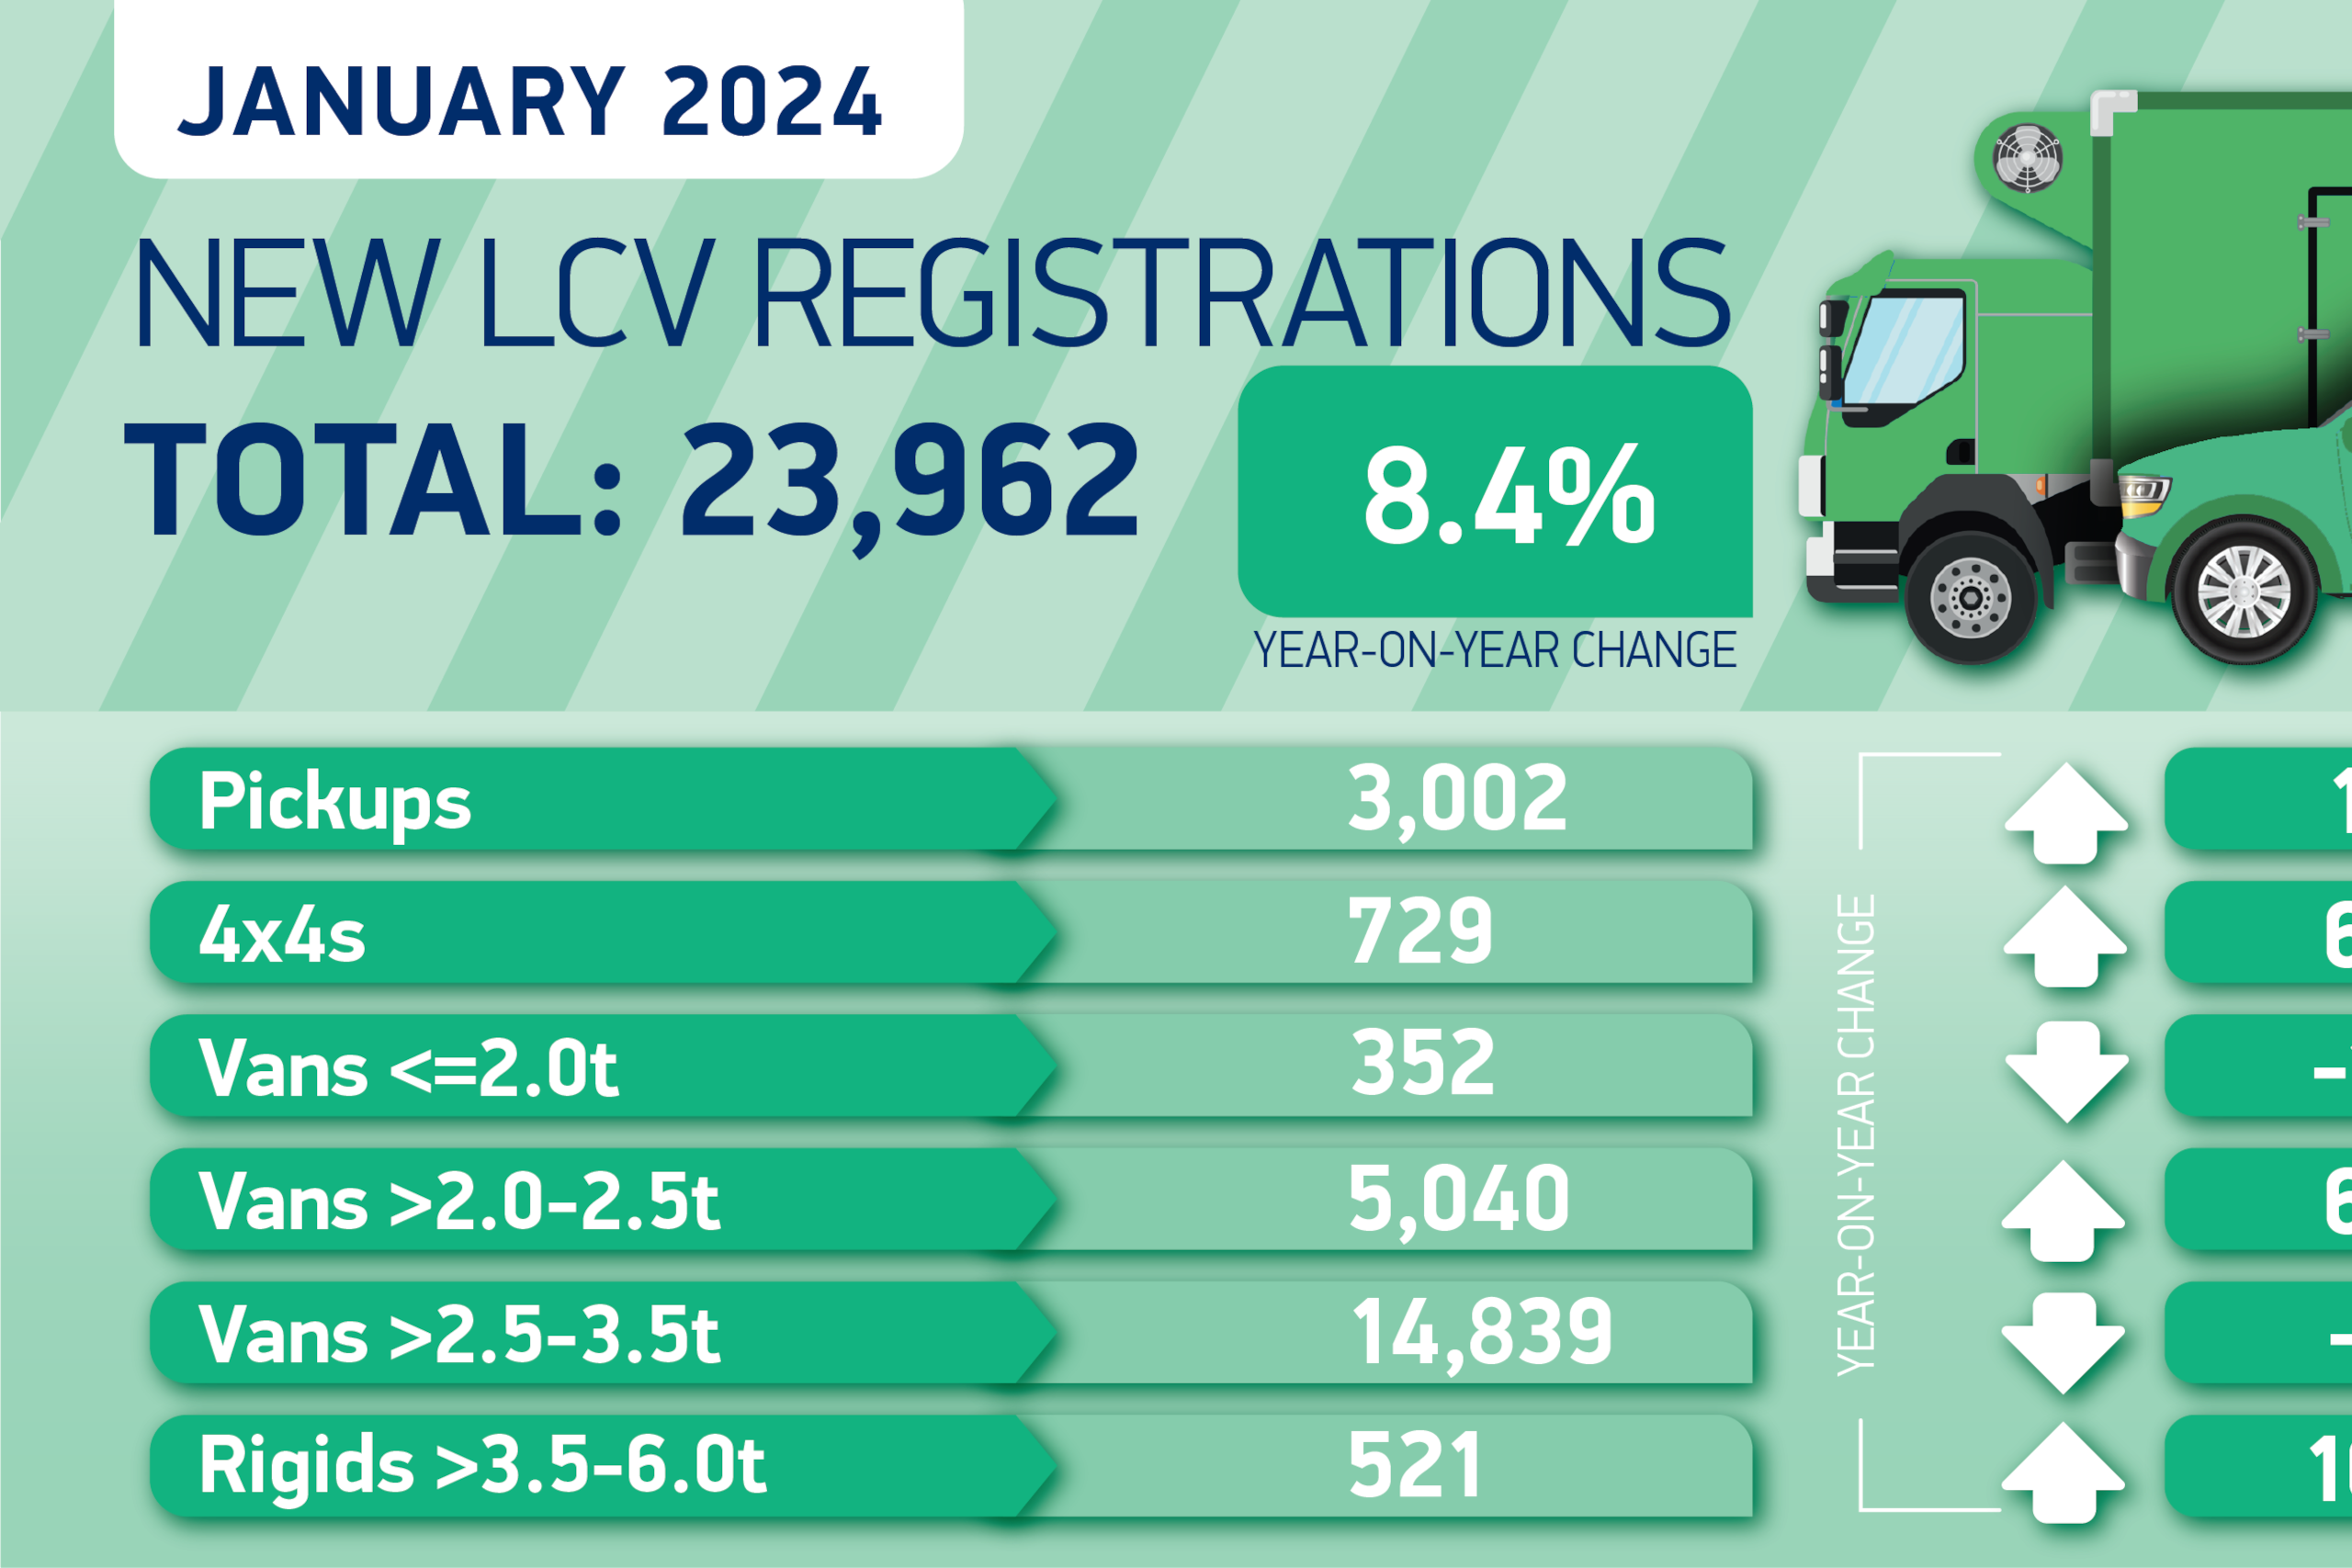 LCV Registrations Continue to Grow, While Electric Vehicles Hit an Impressive Milestone